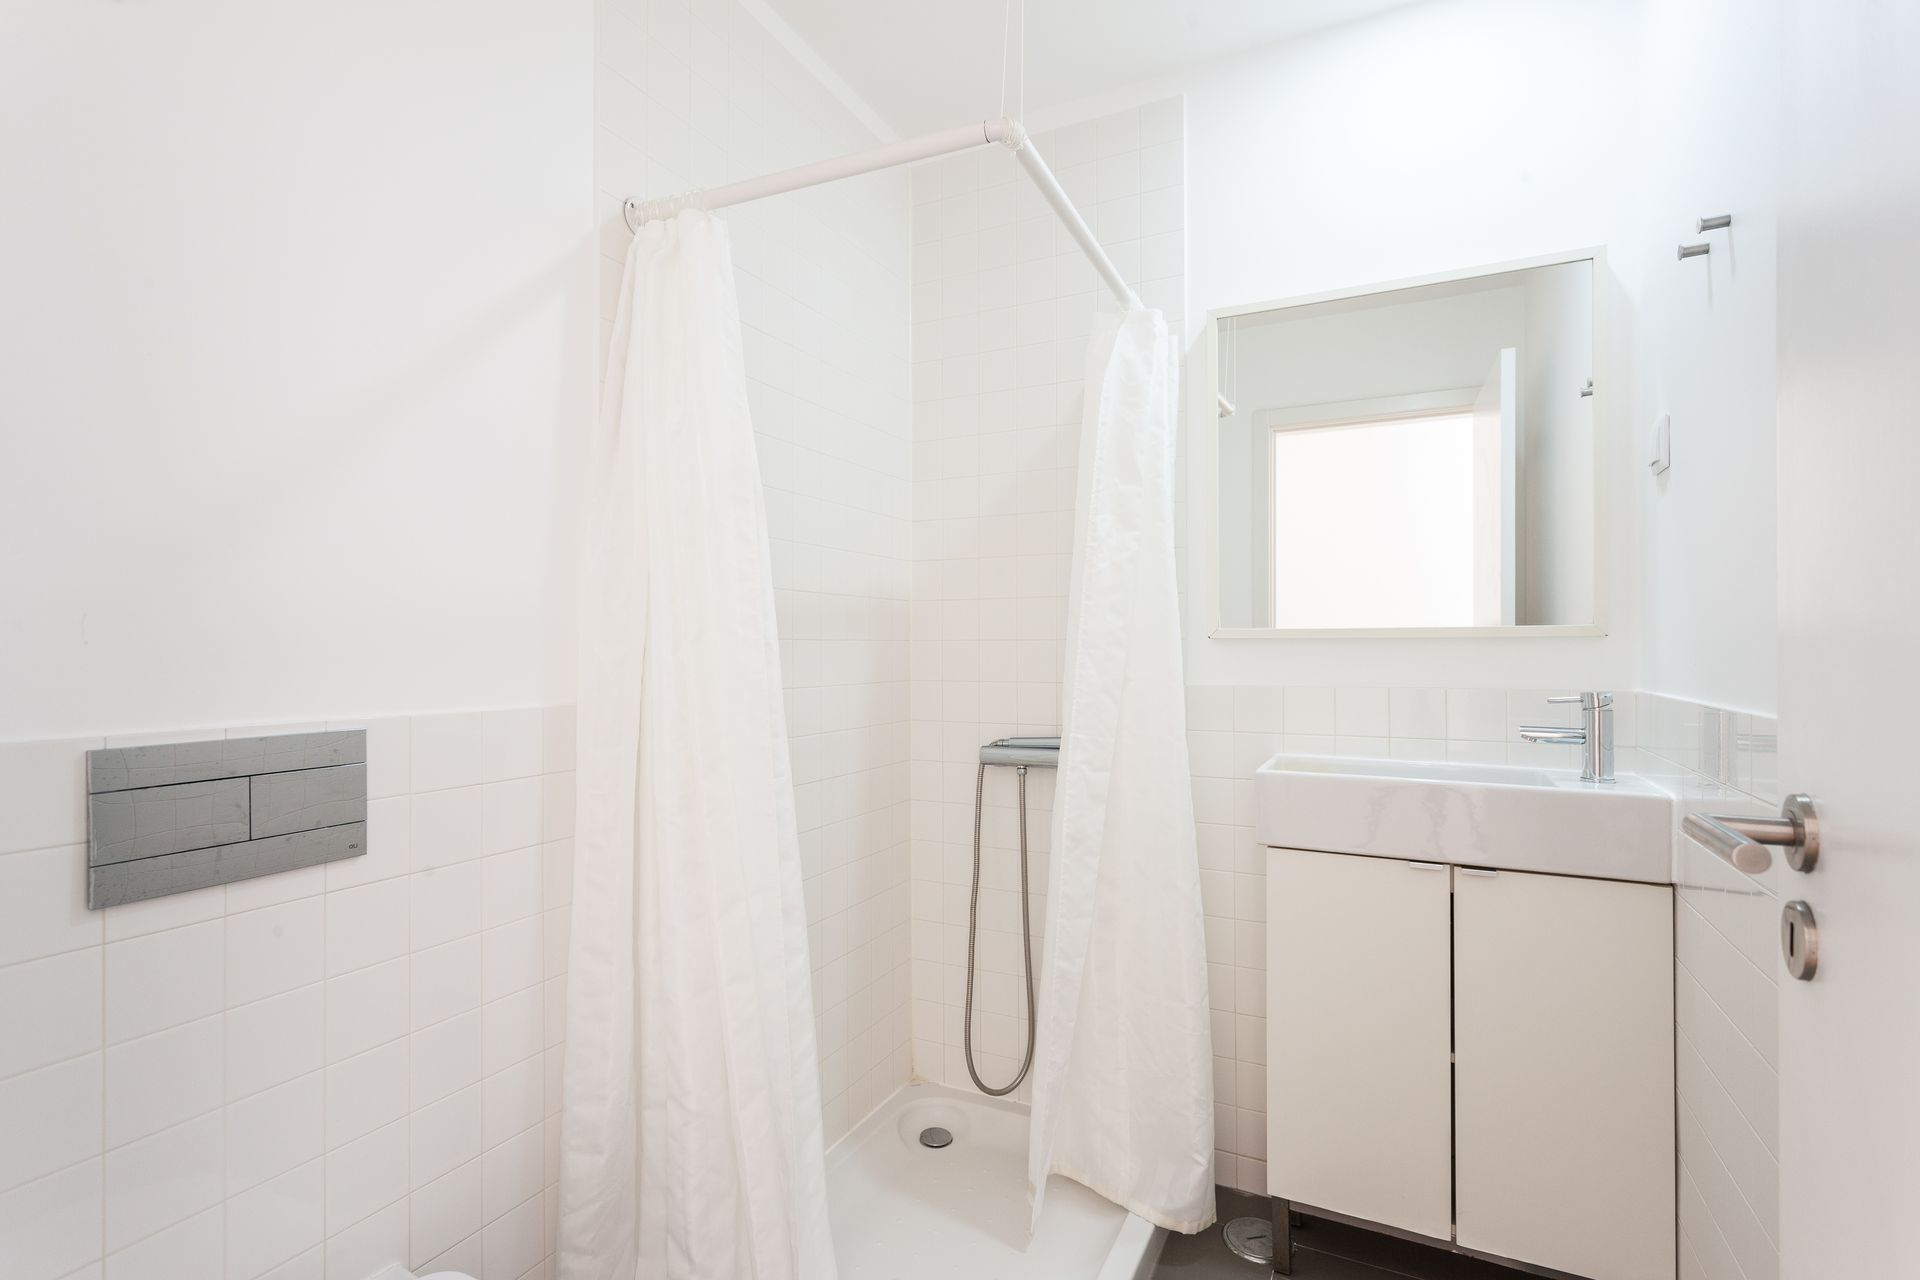 a bathroom with a shower curtain , sink and mirror .